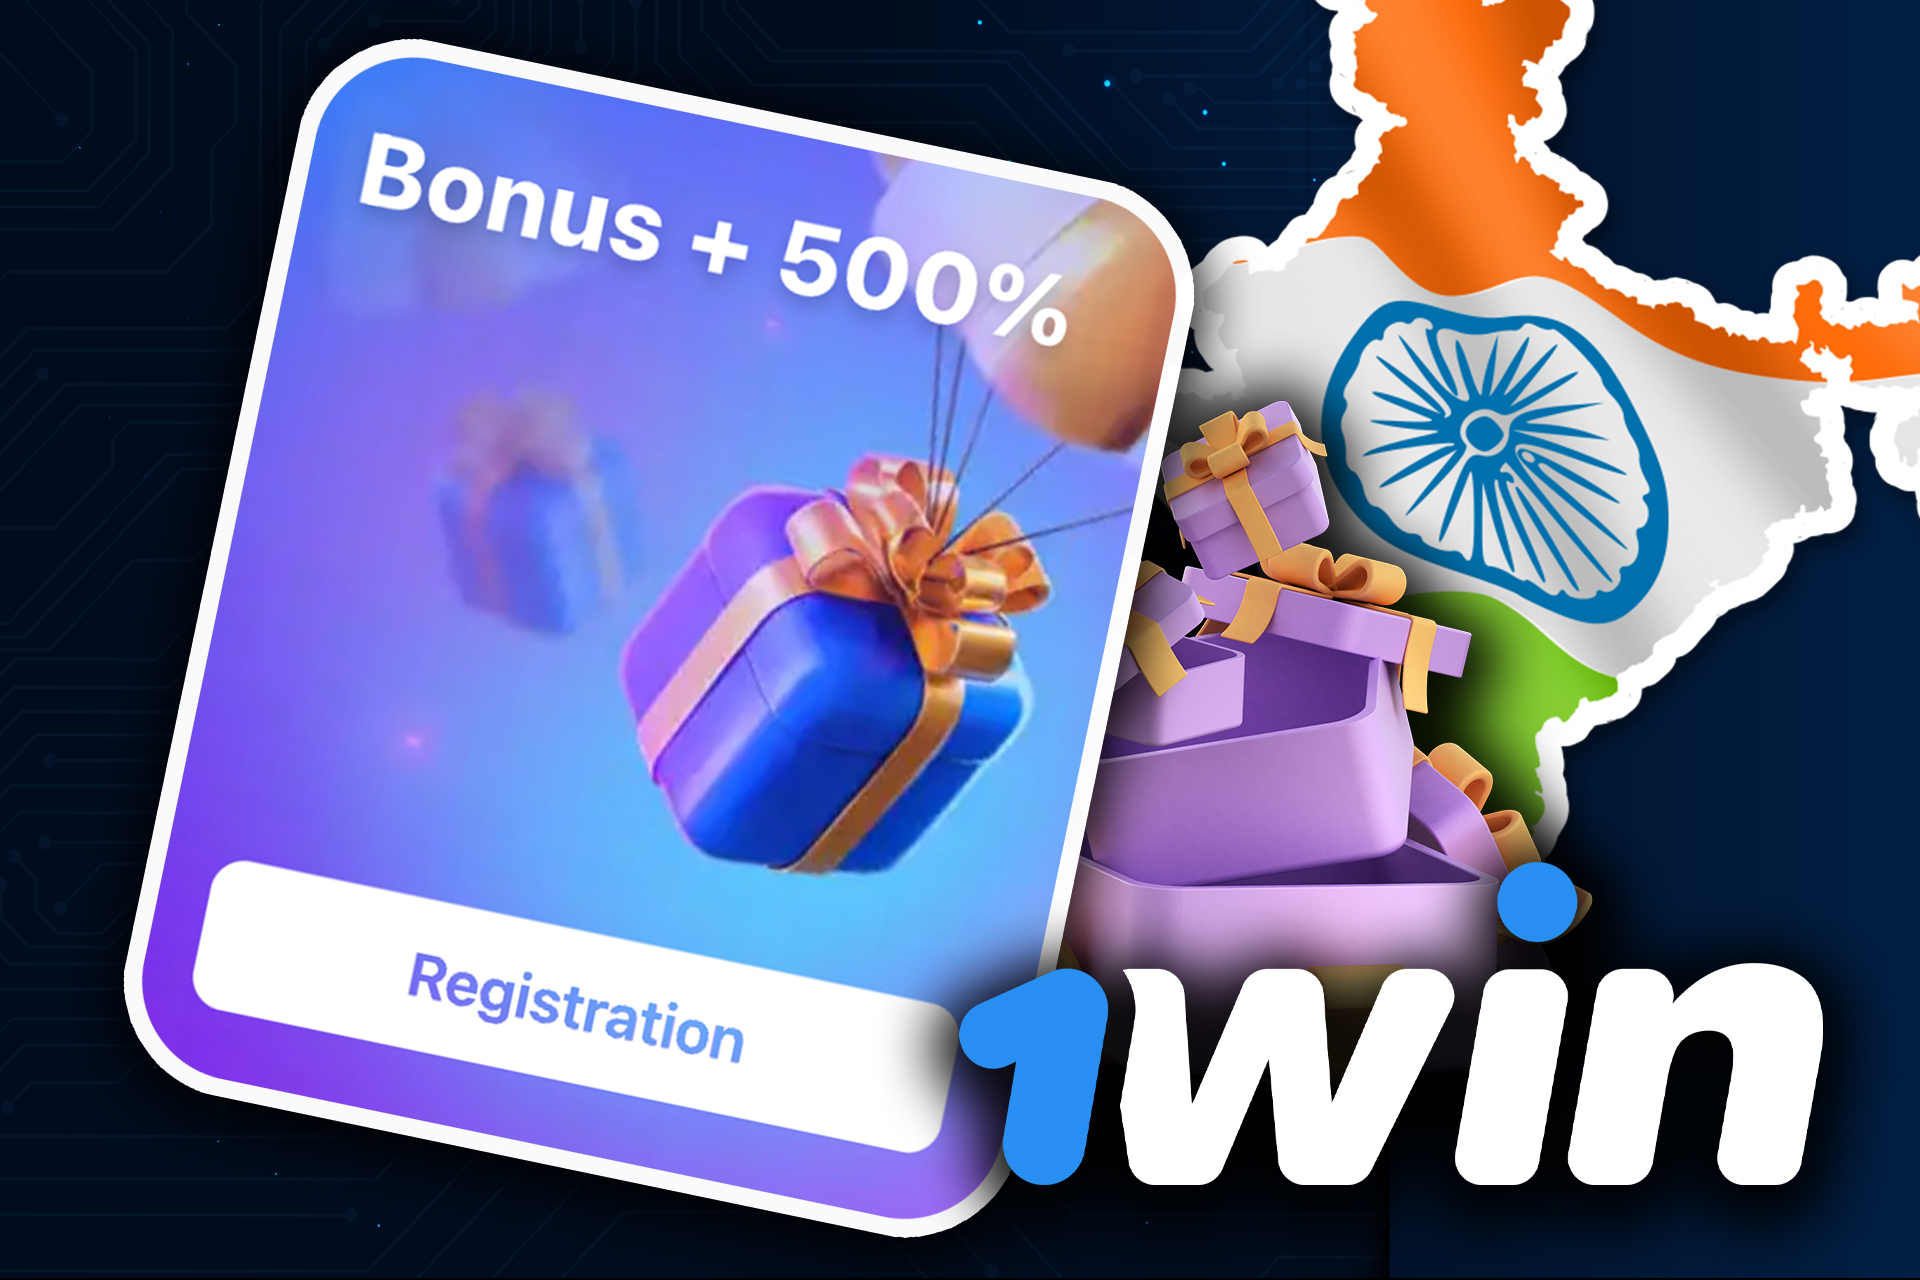 Here is a list of bonuses and promotions that 1win promo code gives you after the registration.